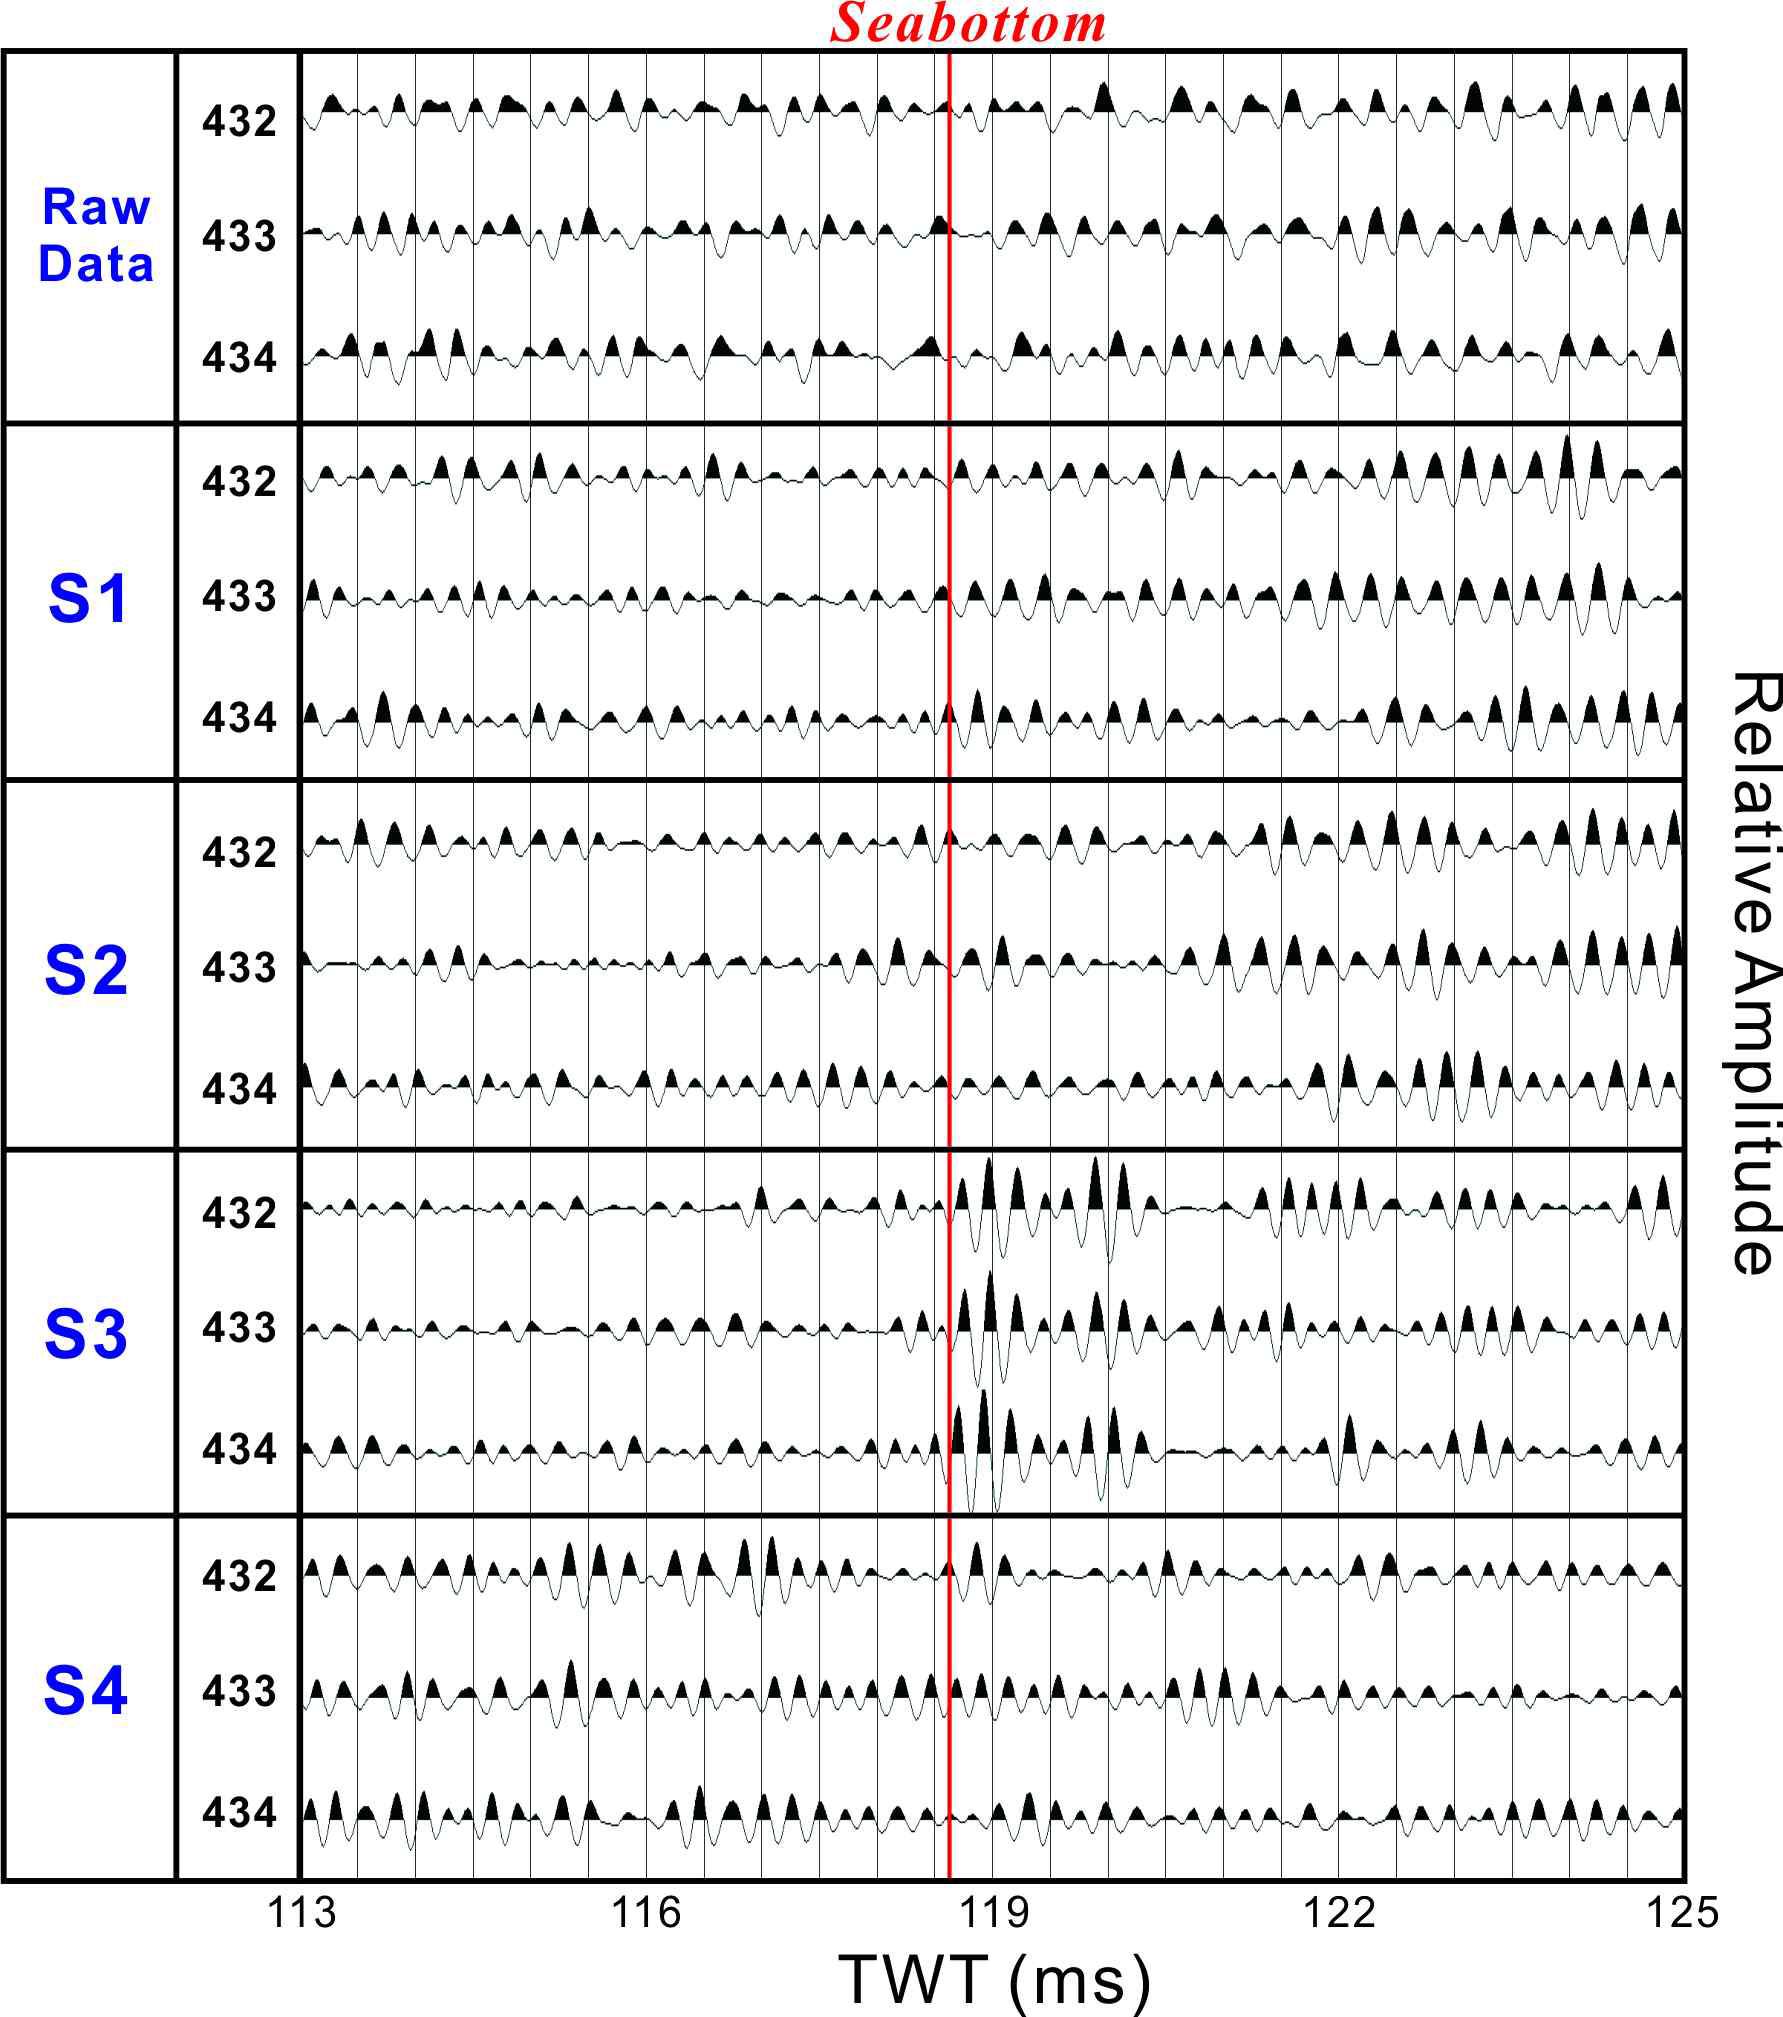 Chirp data acquired at the Korea Strait shelf mud(KSSM) after correlation with source sweep signal as shown in the Table 3-2-2.